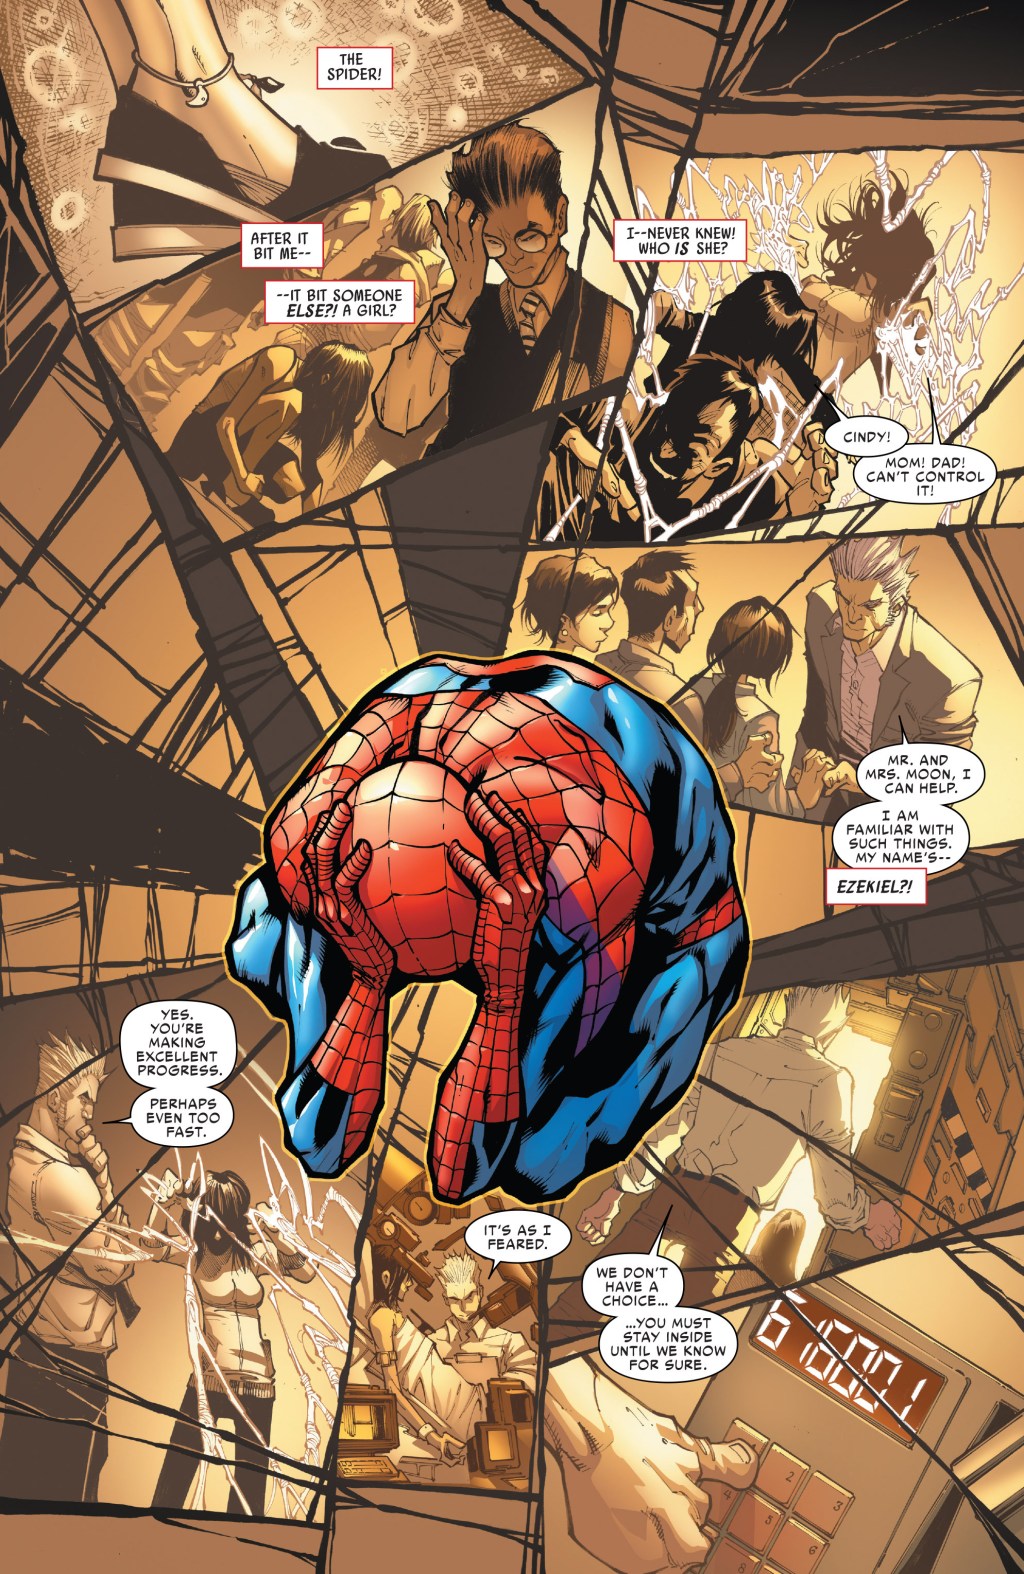 Peter Parker learns of Silk's existence courtesy of The Orb's use of The Watcher's eye in Amazing Spider-Man Vol. 3 #4 (2014), Marvel Comics. Words by Dan Slott, art by Humberto Ramos, Victor Olazaba, Edgar Delgado, and Chris Eliopoulos.